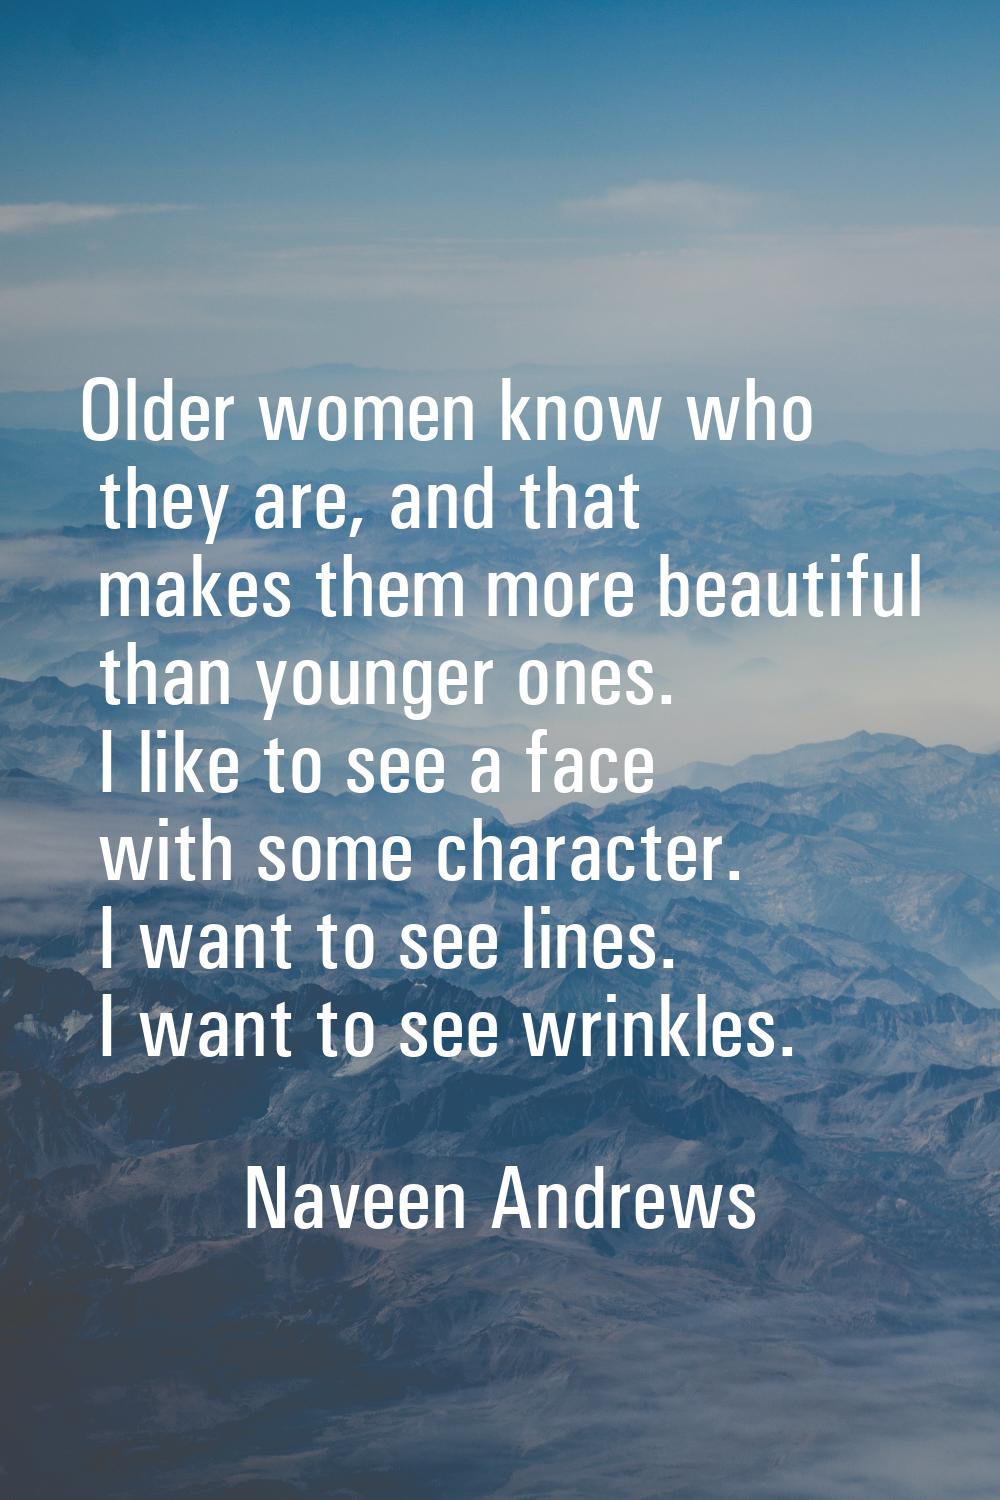 Older women know who they are, and that makes them more beautiful than younger ones. I like to see 